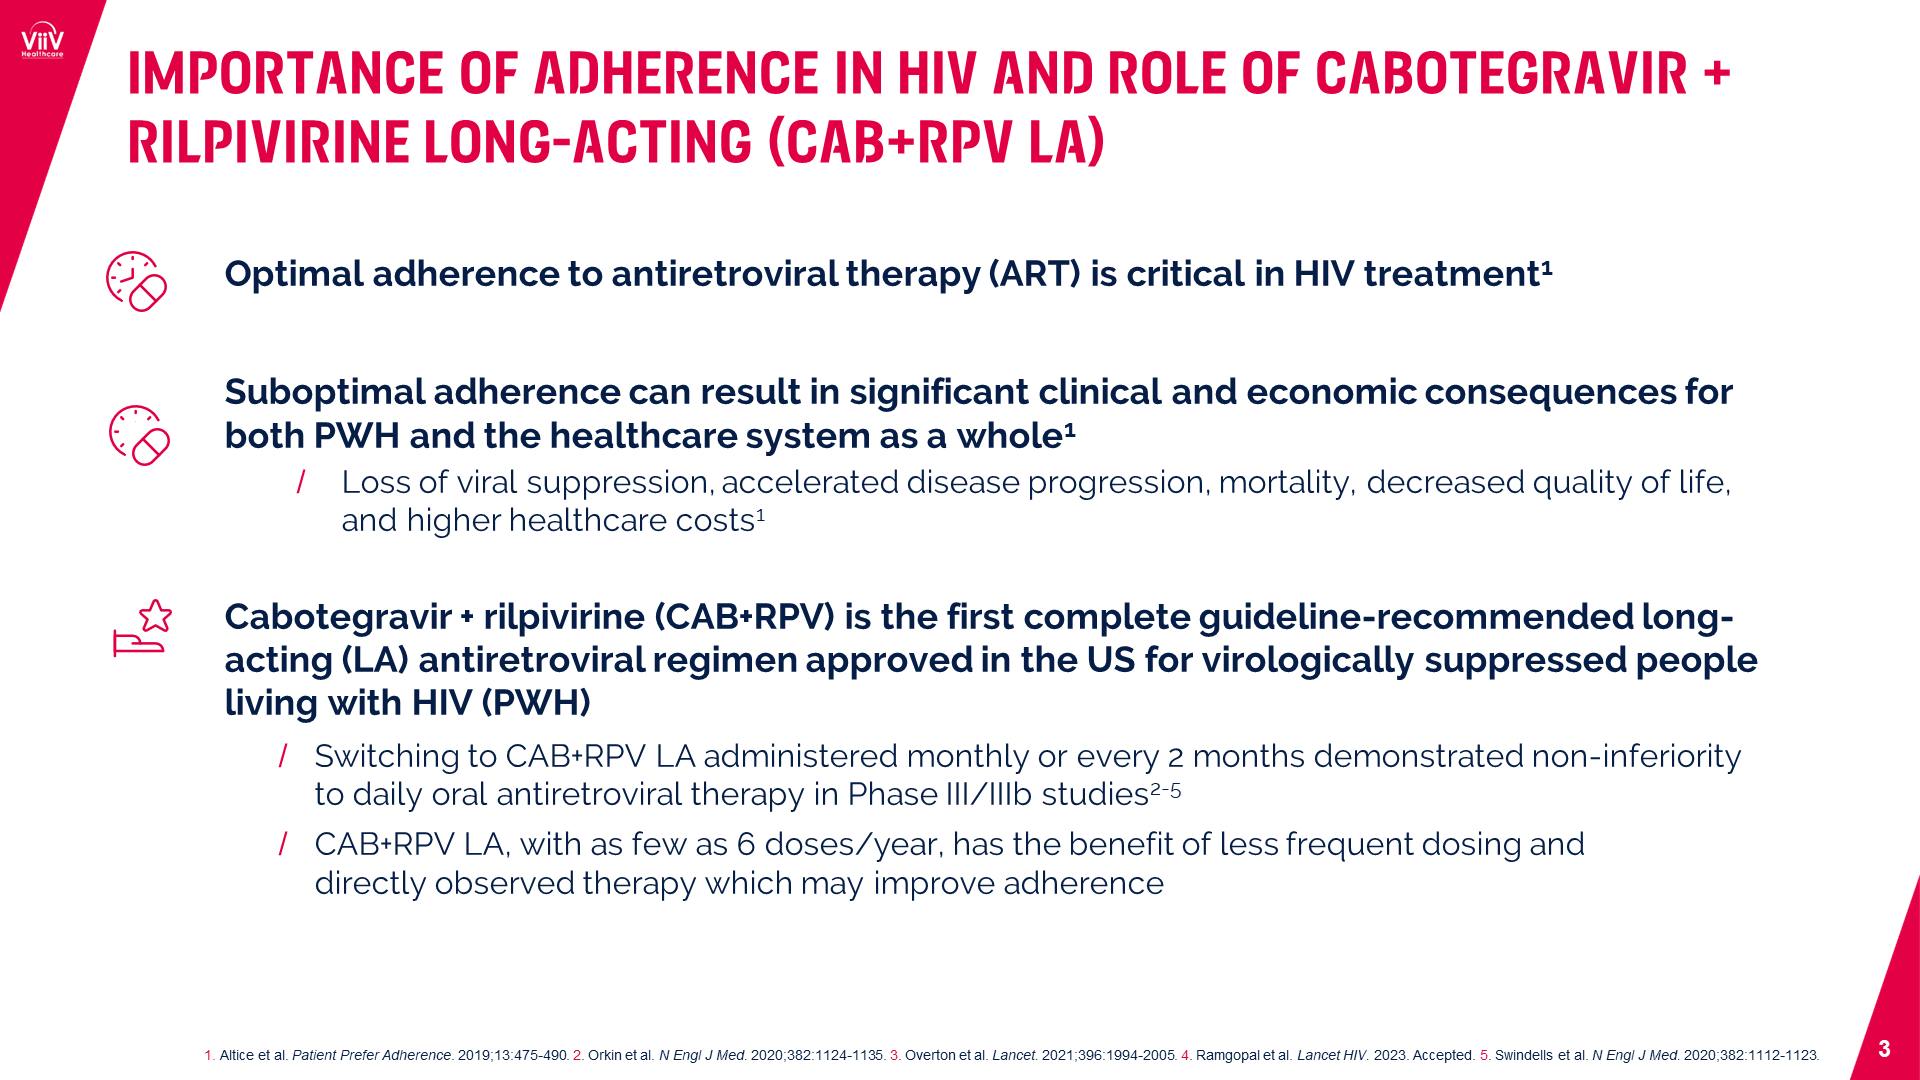 Importance of adherence in HIV and role of Cabotegravir + Rilpivirine long-acting (CAB+RPV LA)